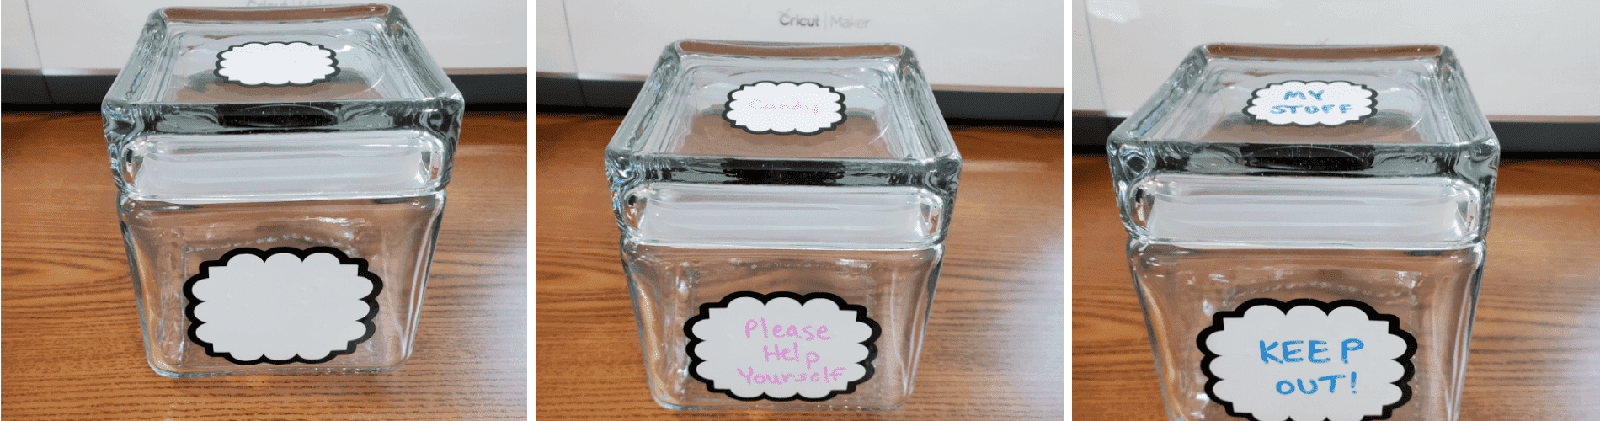 Beginner Cricut Project - Glass Jar with Wipe-Off Labels